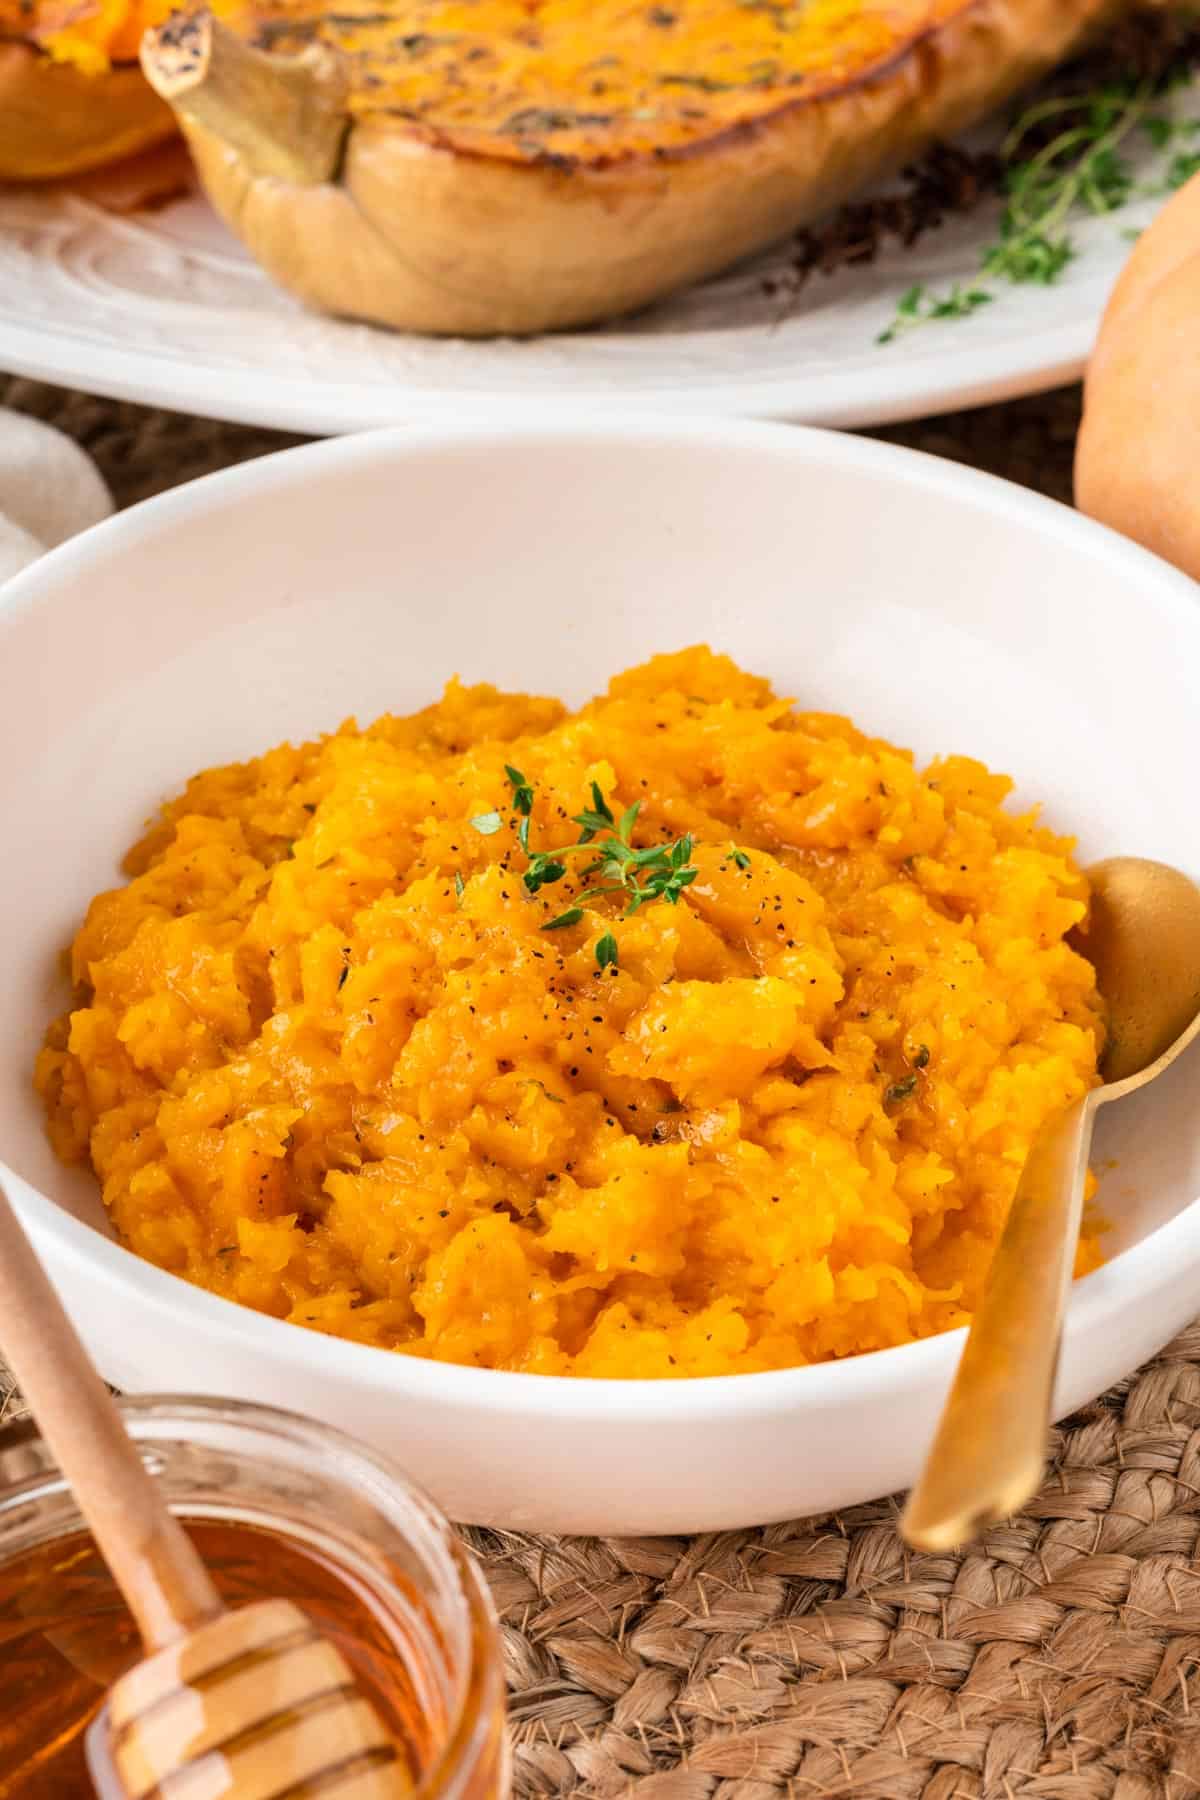 A photo of mashed butternut squash in a white bowl with a gold spoon.